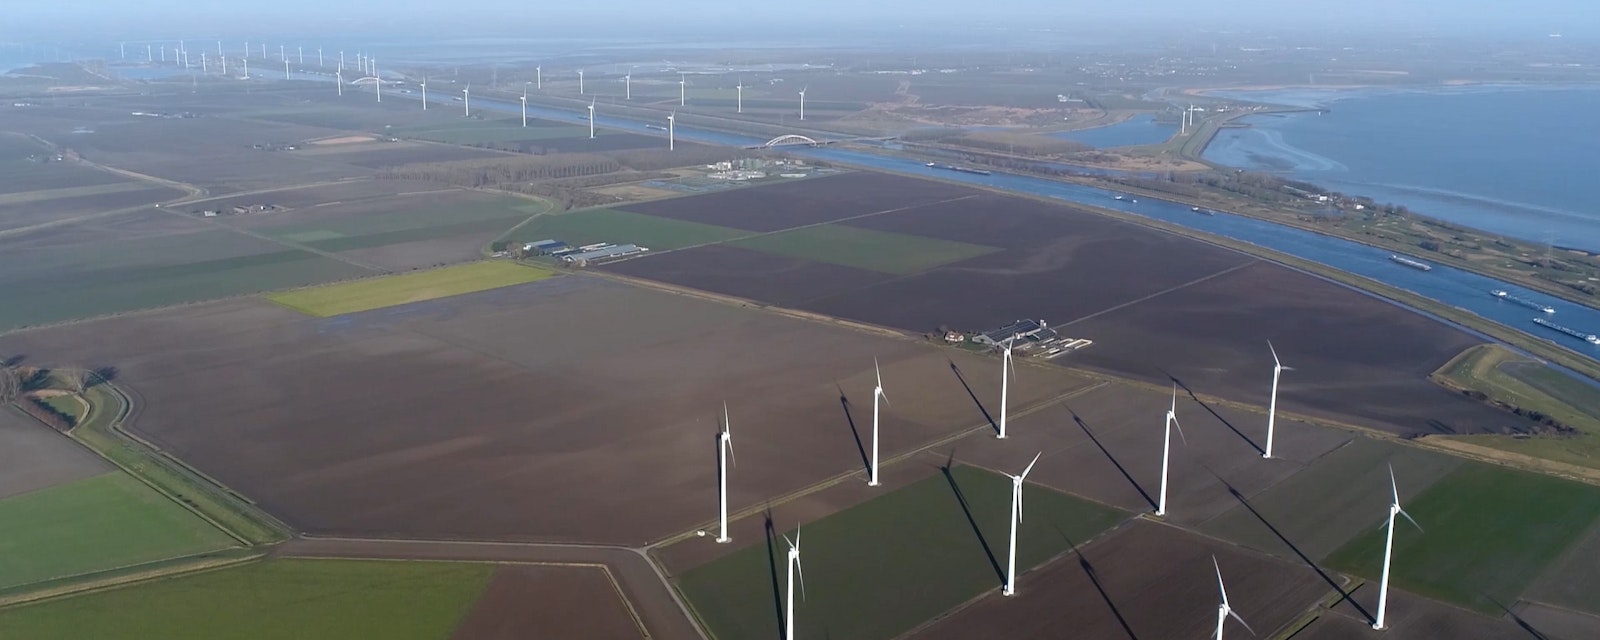 Aerial,Bird,View,Photo,Of,Wind,Farm,A,Group,Of